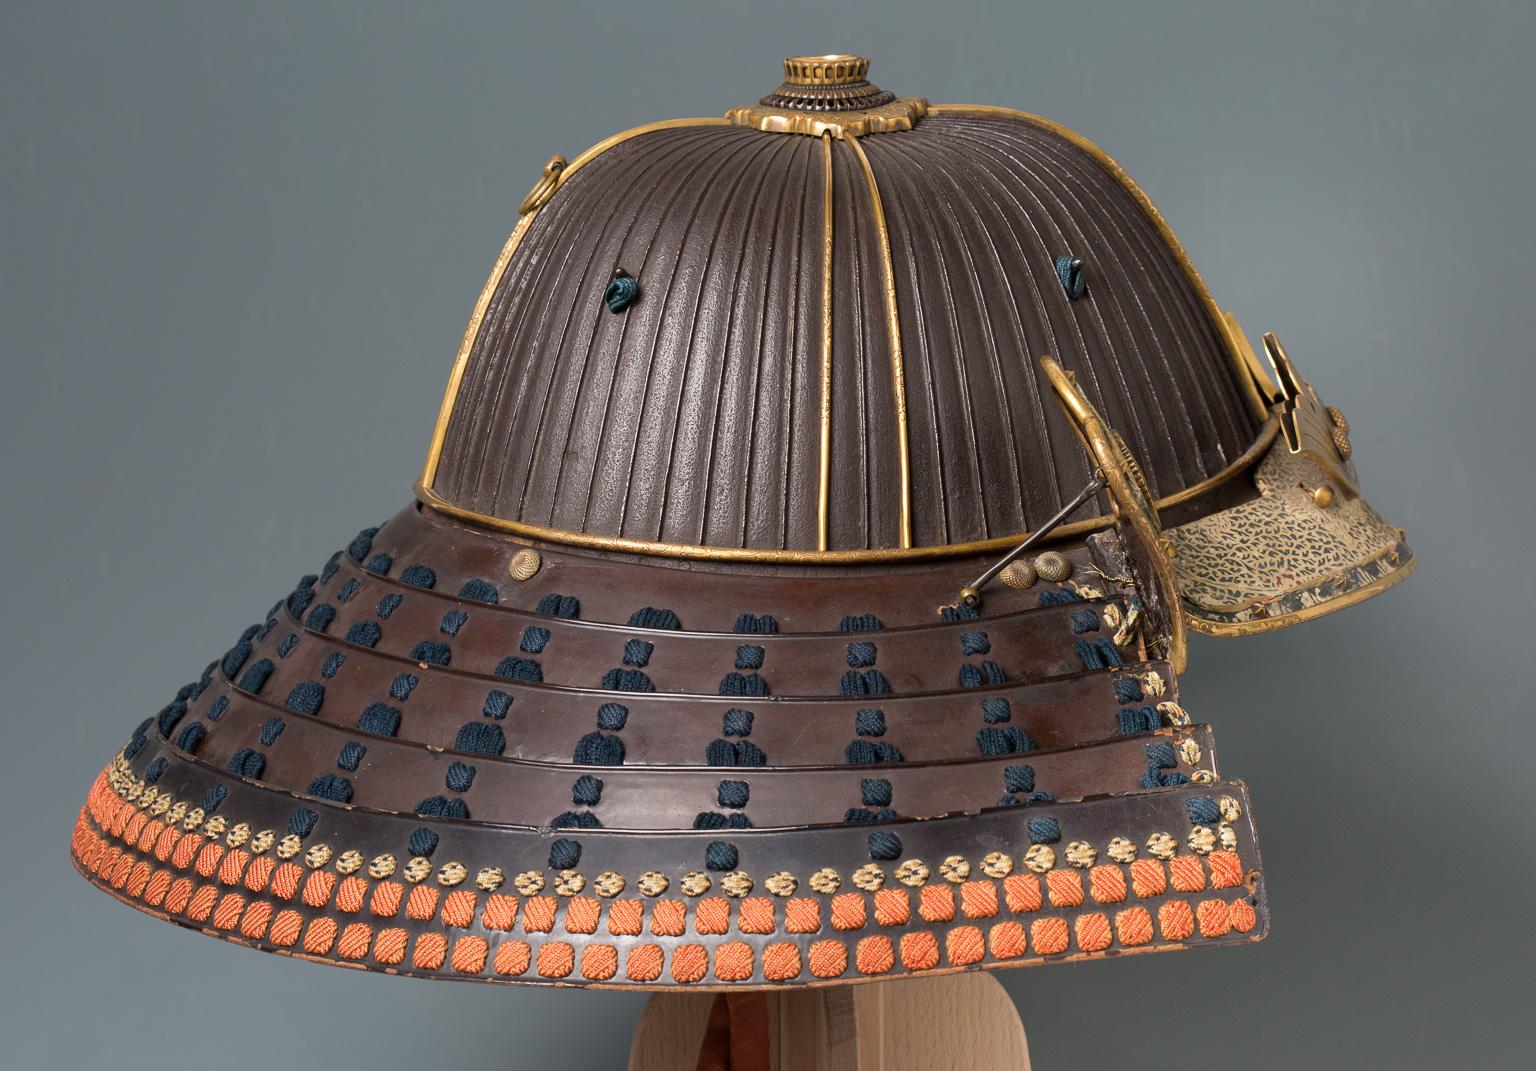 Suji-bachi kabuto
A 62-plates samurai helmet bearing the crest of the Nabeshima clan, circa 1570-1620.

Signed: Myochin Nobutaka

This excellent kabuto is signed by an unrecorded Japanese armorer and is hence an important documental piece. The